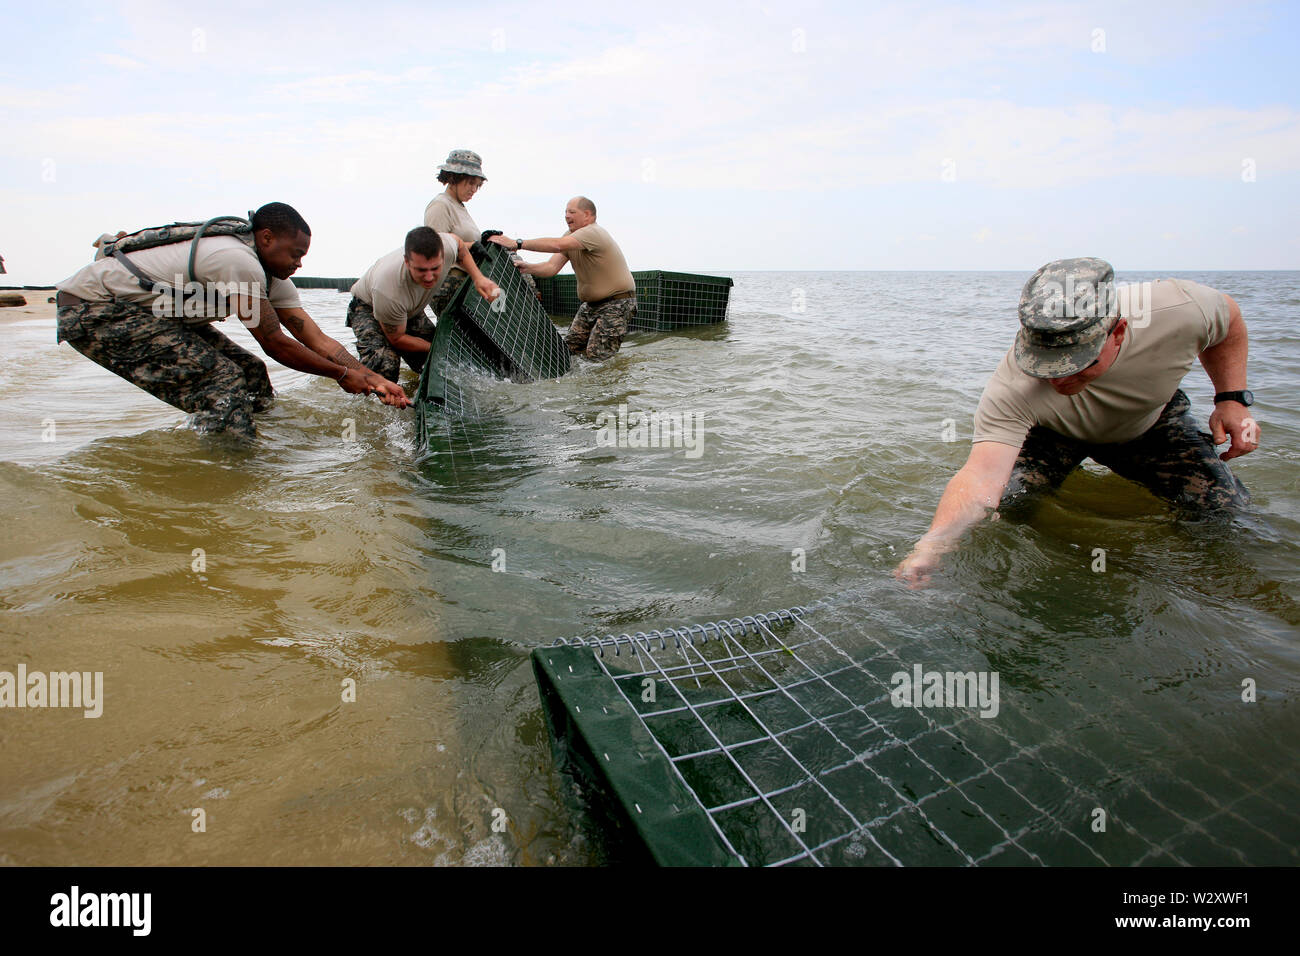 Soldiers from the National Guard 711 Brigade Support Batallion install barriers on the inside shore of the Dauphin Islands. The barriers will be filled with polymers that turn any oil spill into a rubberlike solid. The State of Alabama hope to avoid severe damage to the island from the oil spill caused by the Deepwater Horizon explosion and blowout. Stock Photo